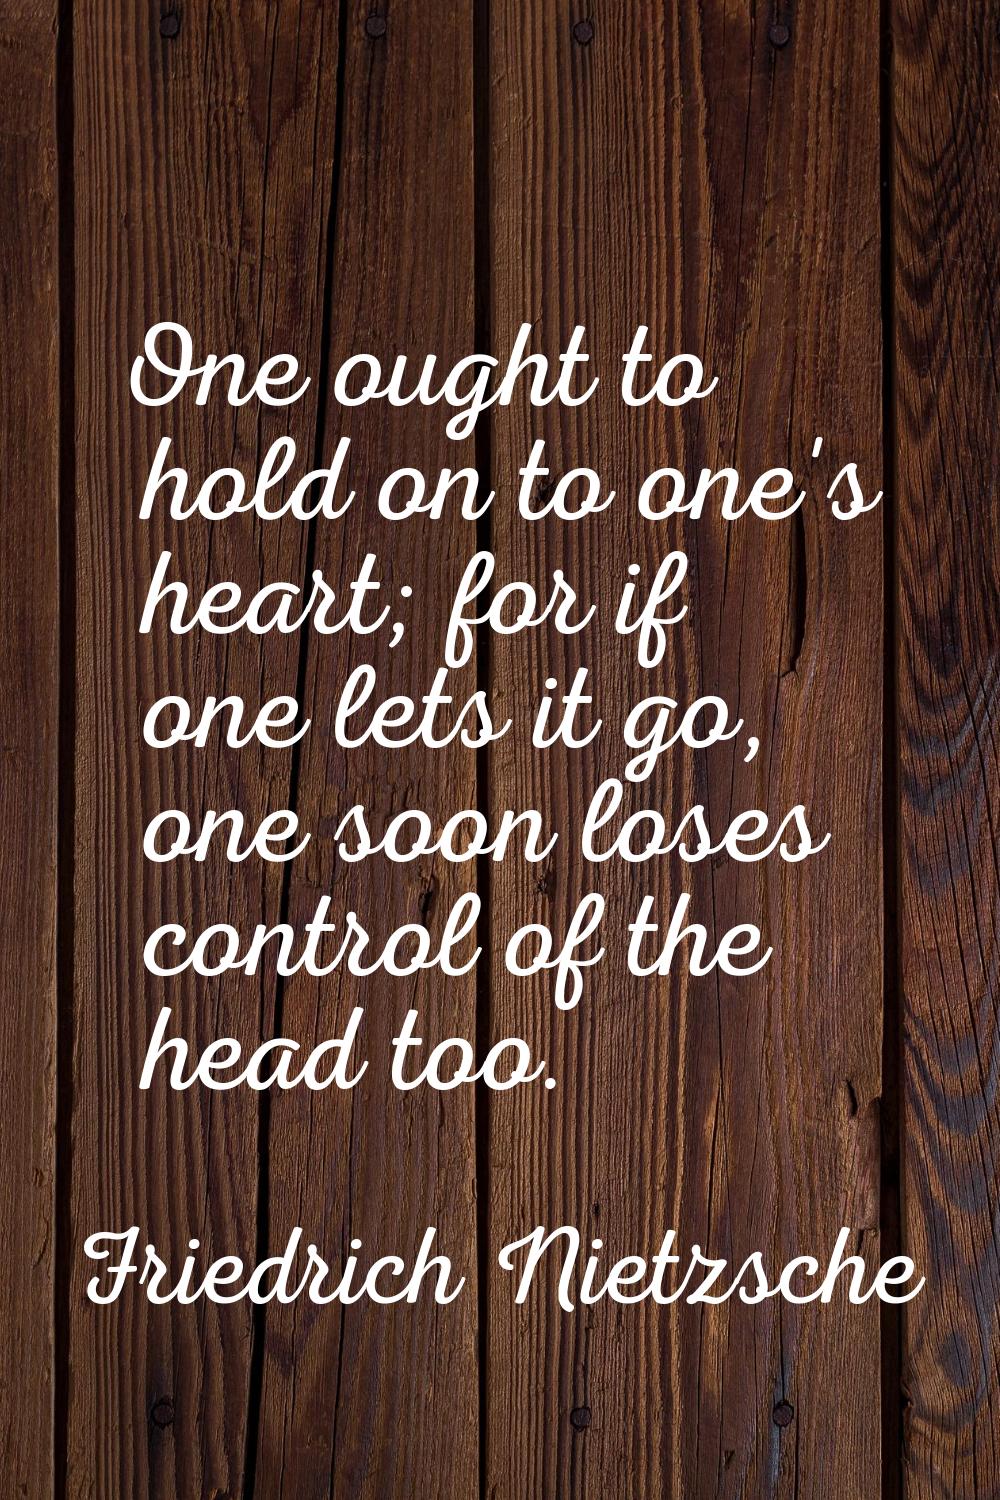 One ought to hold on to one's heart; for if one lets it go, one soon loses control of the head too.